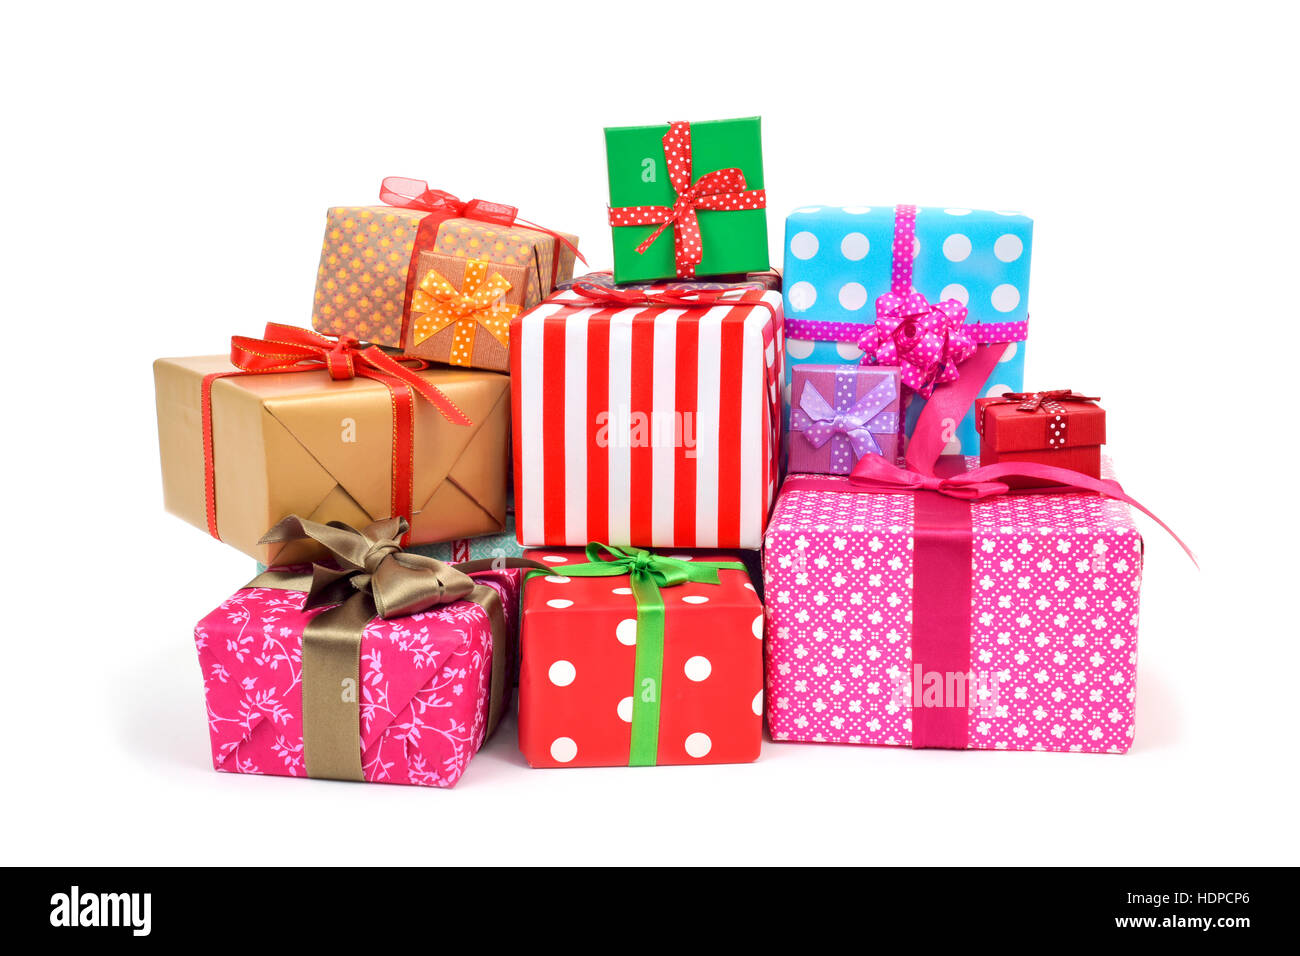 closeup of a pile of gifts wrapped in nice papers and tied with ribbons of different colors on a white background Stock Photo